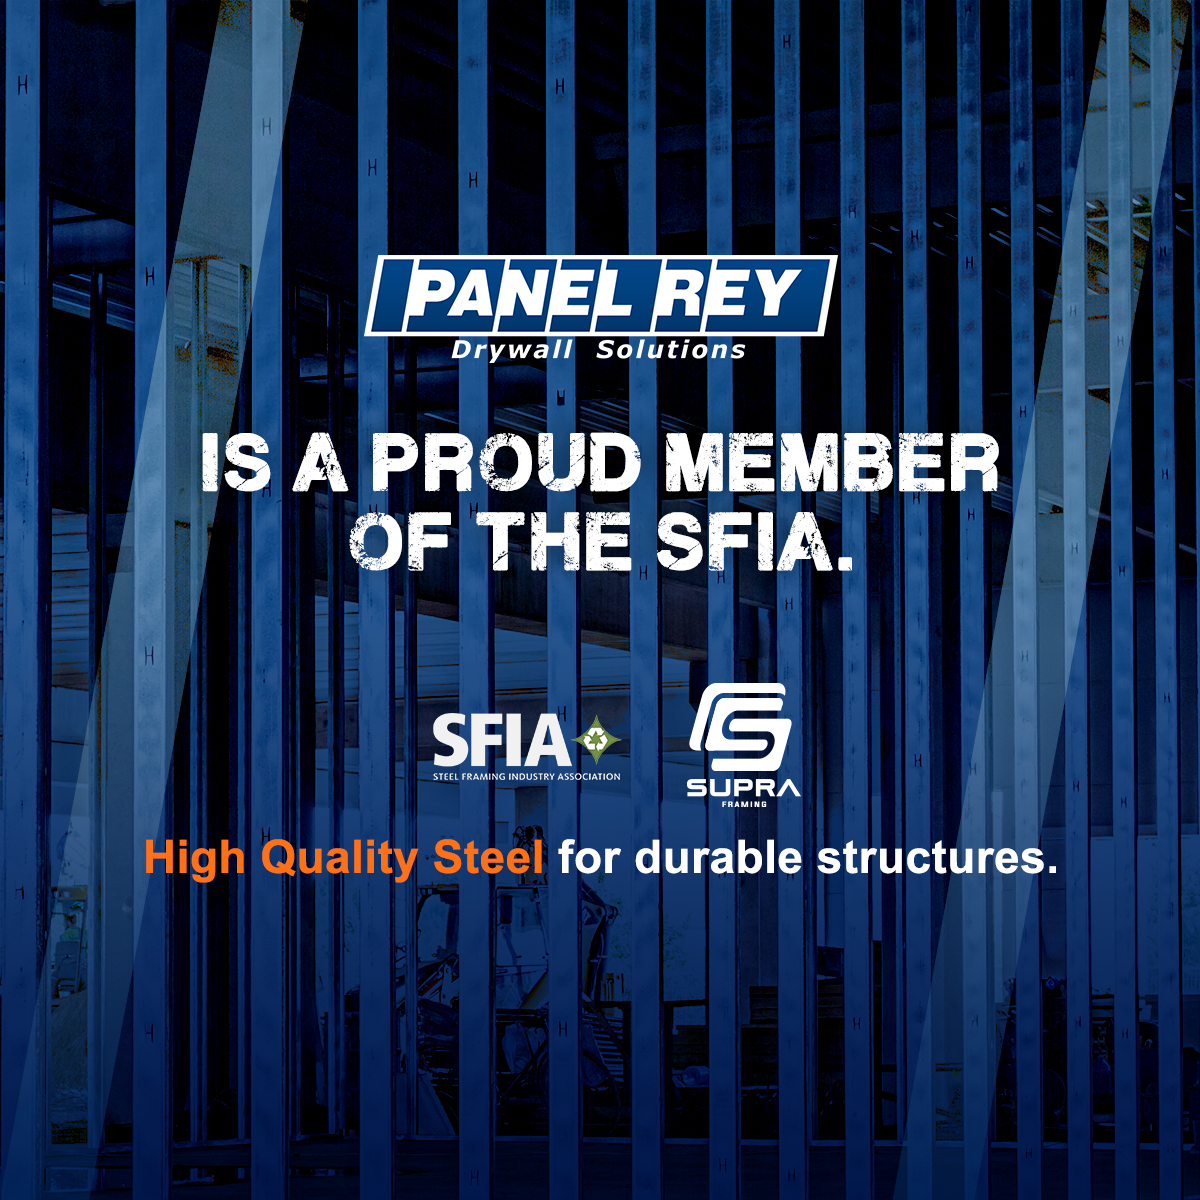 Our SUPRA Framing studs and tracks are made of galvanized steel, specially designed to attach drywall or wall curtains, among other purposes.

Visit us at: panelrey.com/?lang=en

#PanelRey #drywall #drywallfinisher #drywallrepair  #drywallworks #drywallcontractor